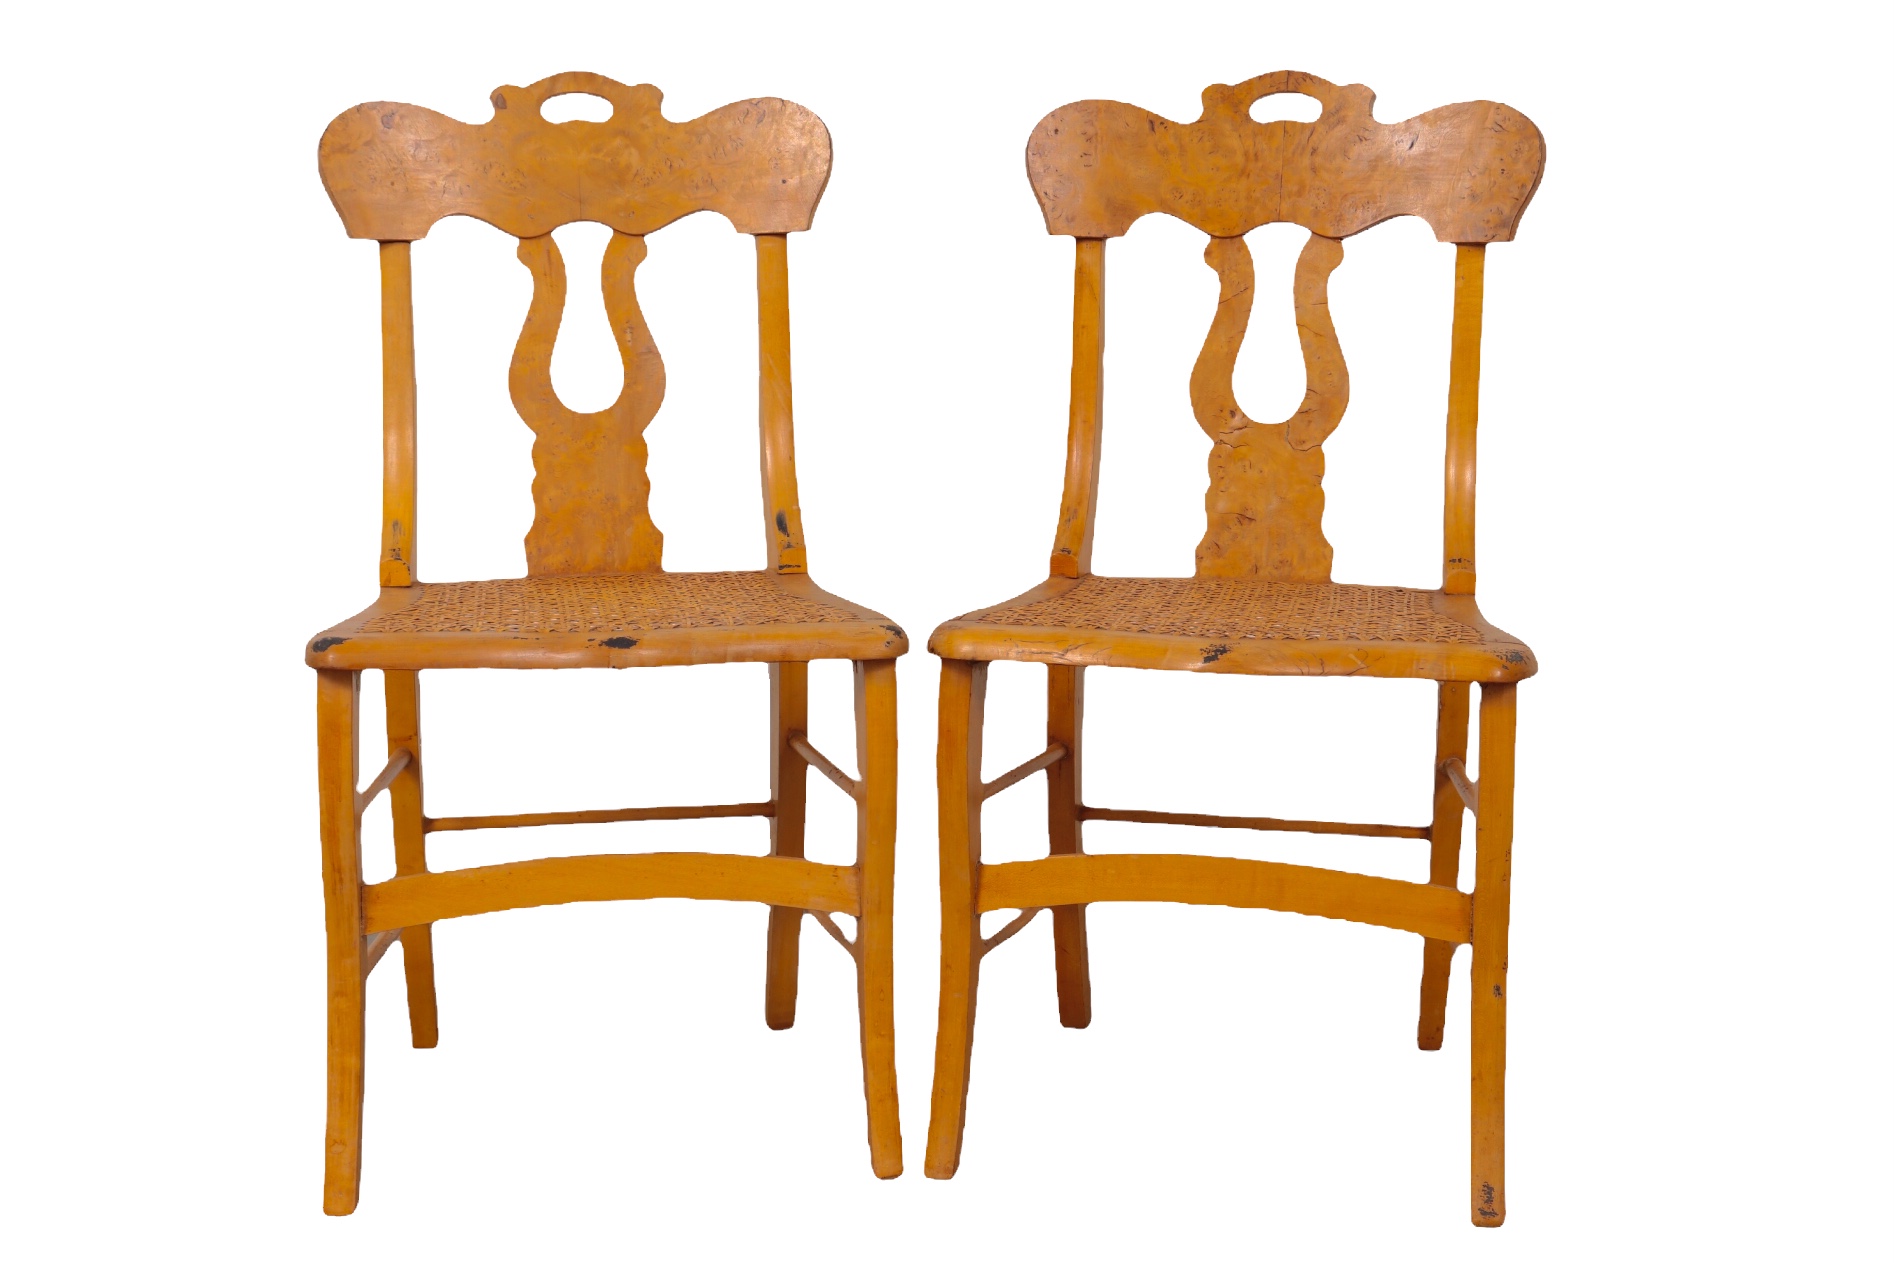 Antique Burlwood Caned Chairs - a Pair~P77651264